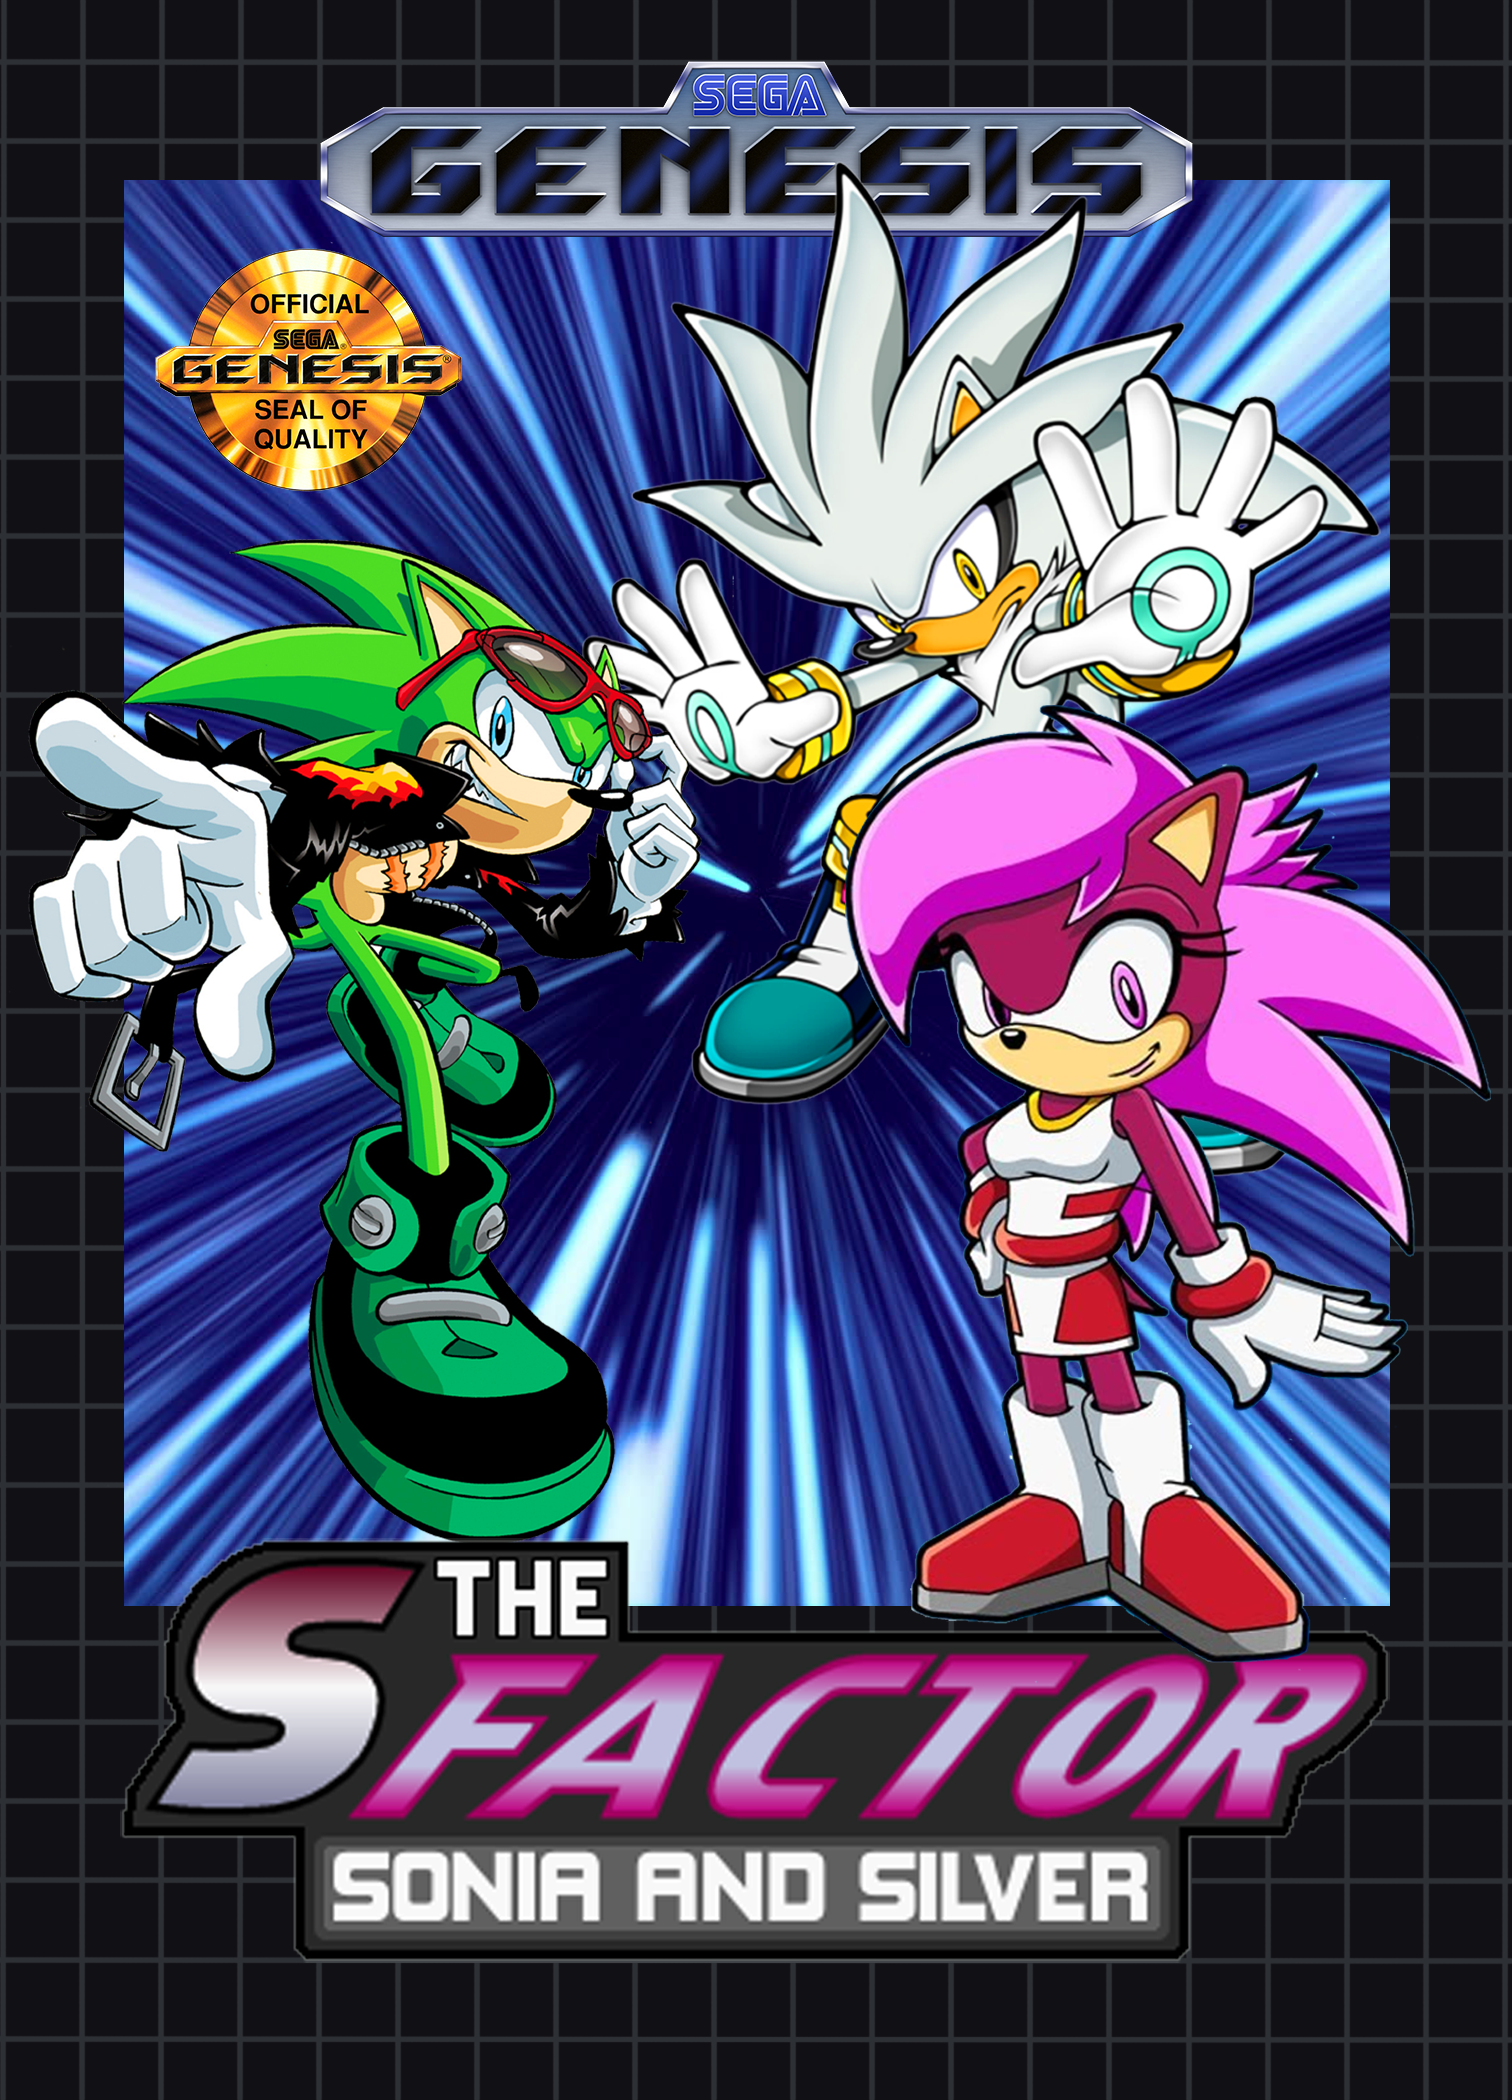 The S Factor-Sonia and Silver box cover